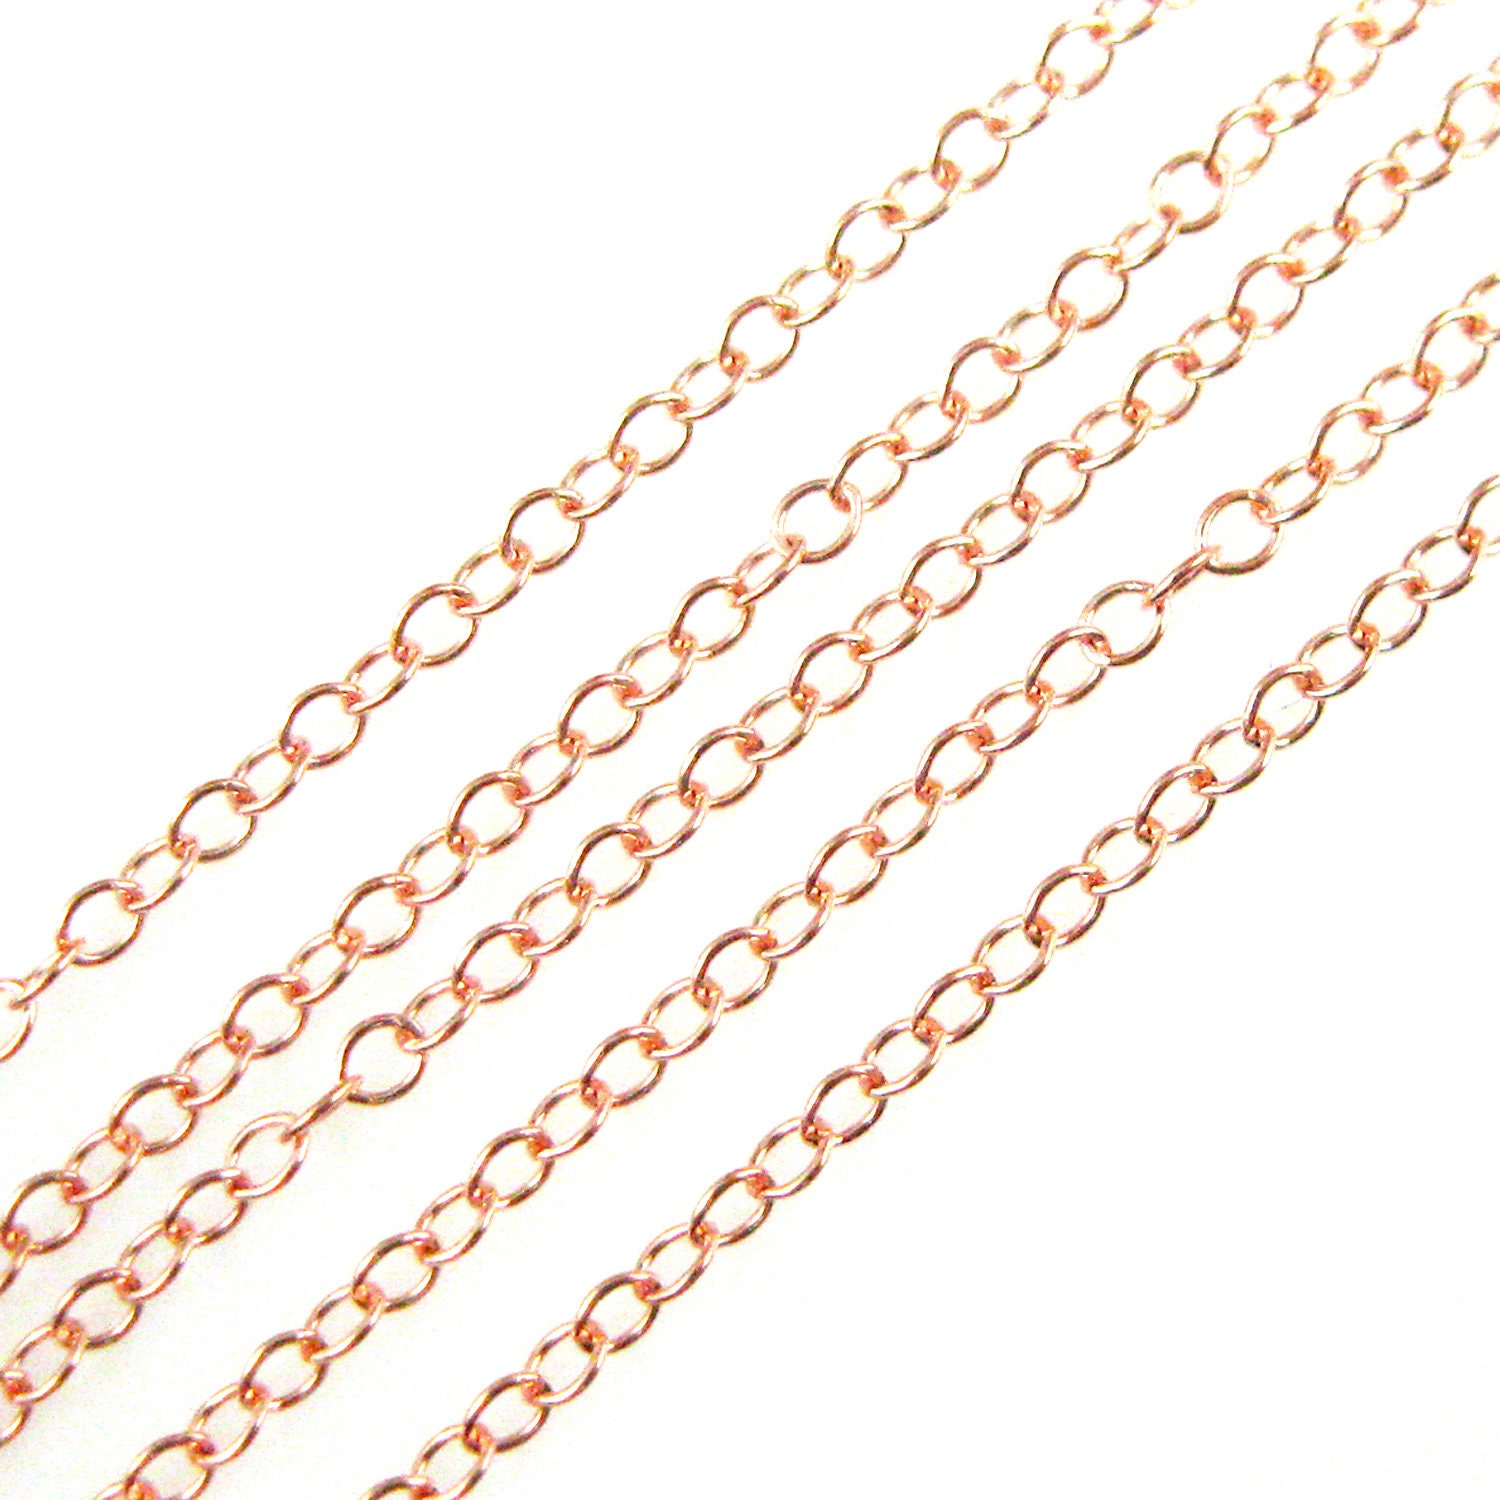 Sterling Silver Chain,Sterling Silver Bulk Chain,Silver Chain,Small Round  Cable Chain-2mm(Up to 30% off )- Supplies Wholesale- SKU: 101020